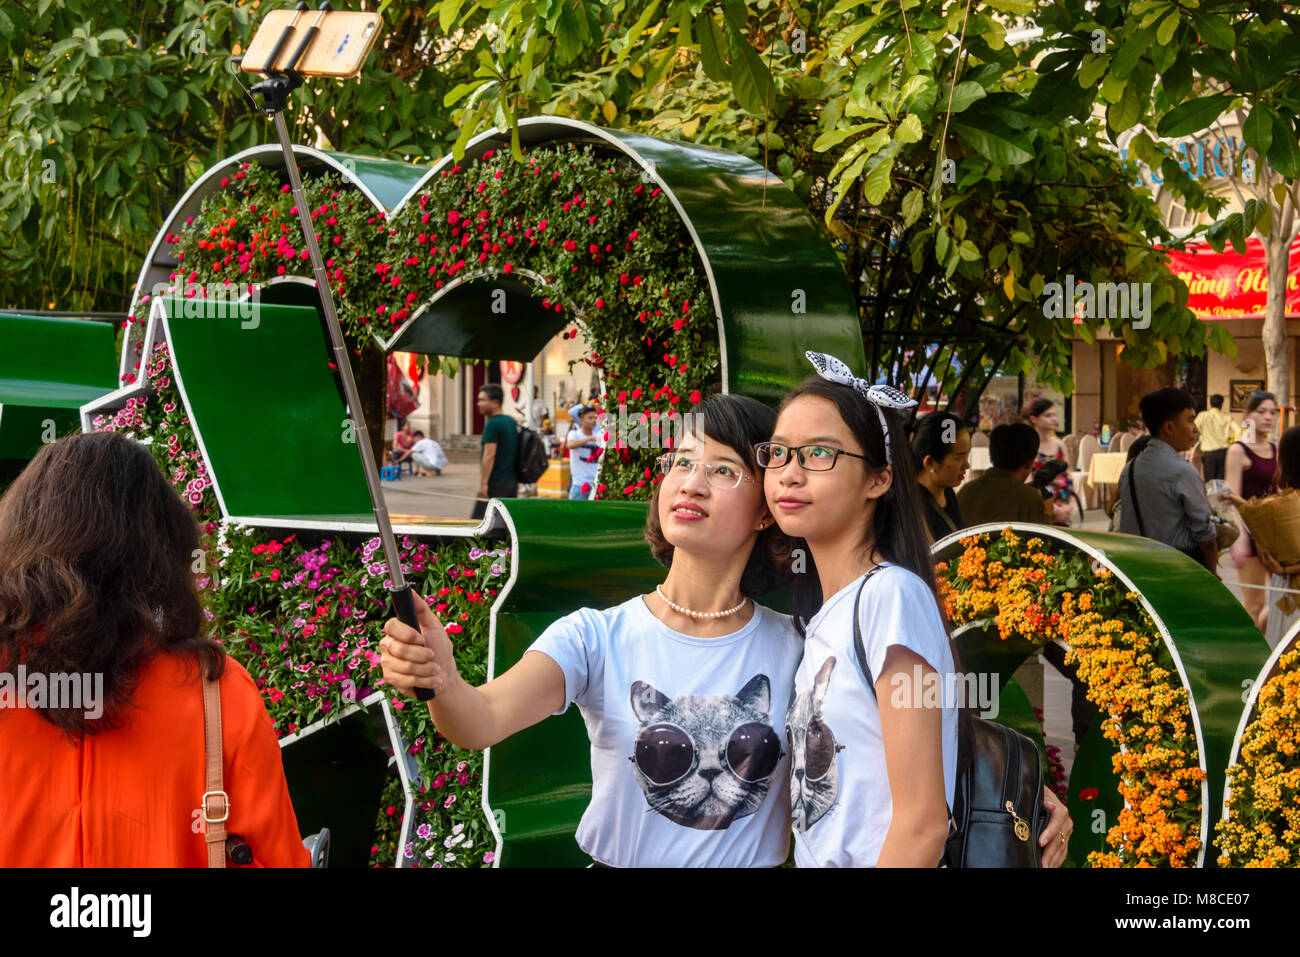 Two girls take a selfie using a selfie stick in front of Chinese Lunar New Year decorations, Ho Chi Minh City, Saigon, Vietnam Stock Photo